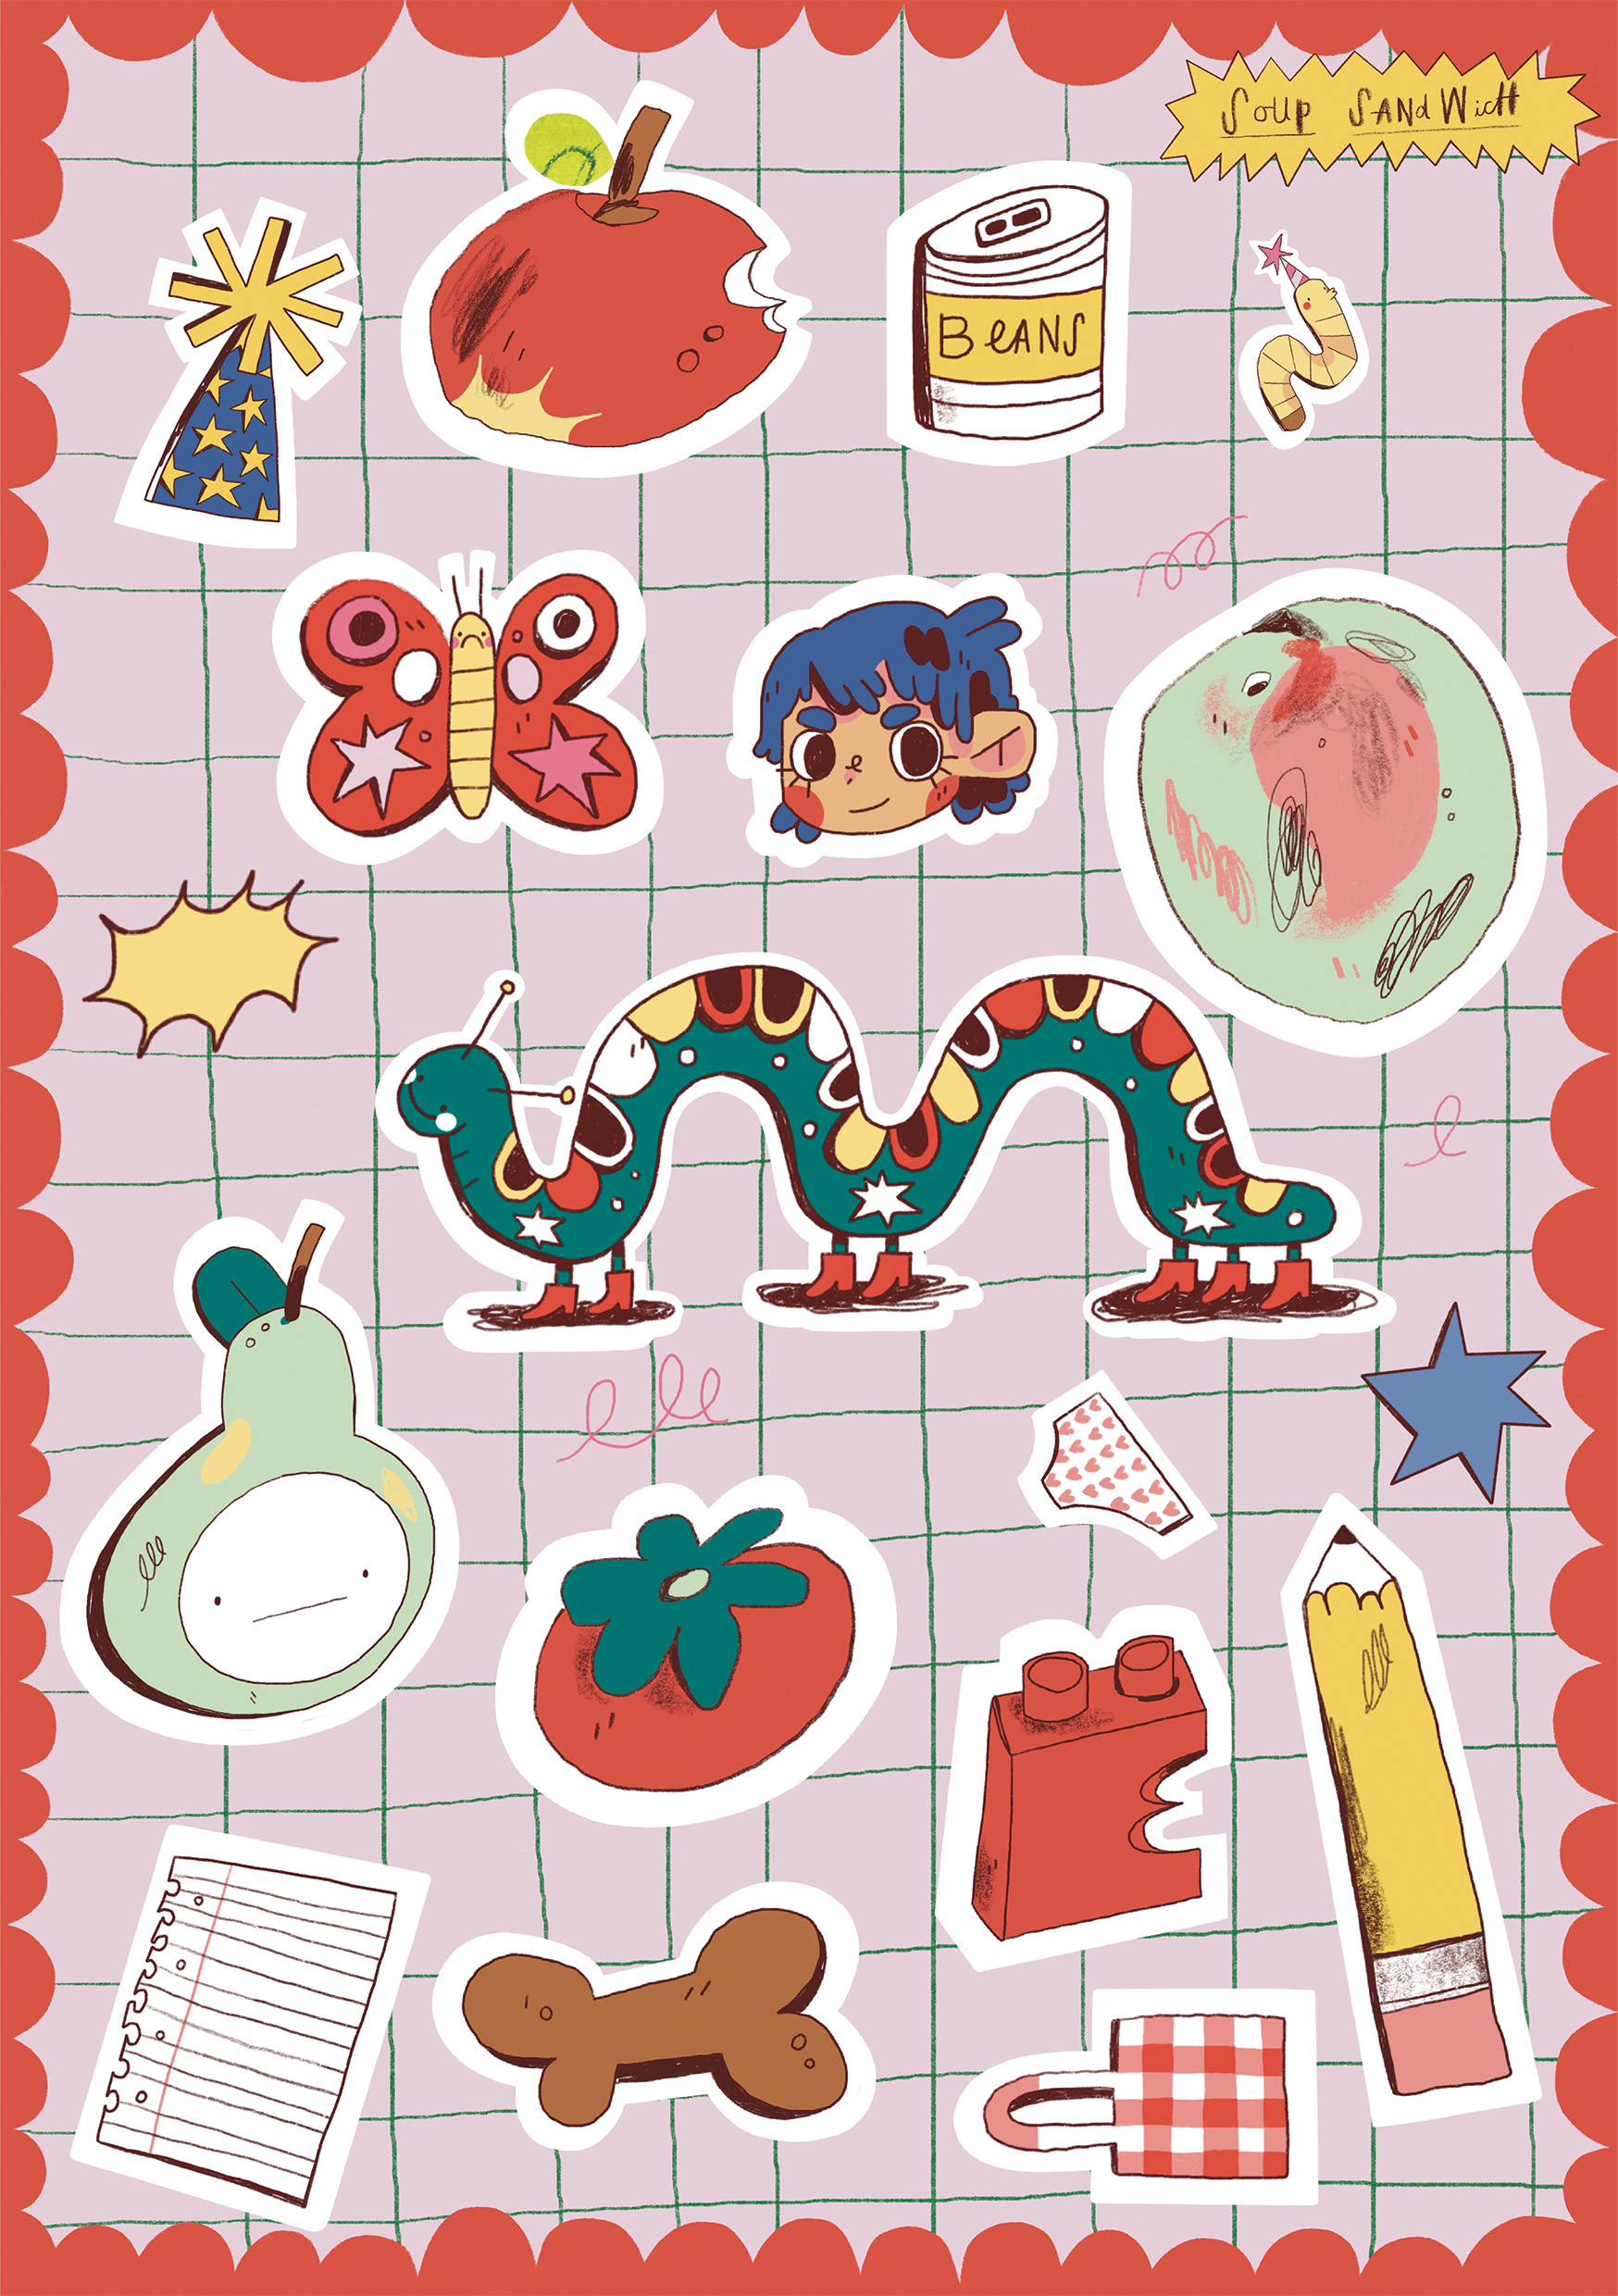 An A5 sticker sheet containing a collection of 16 illustrated objects, foods, and characters.